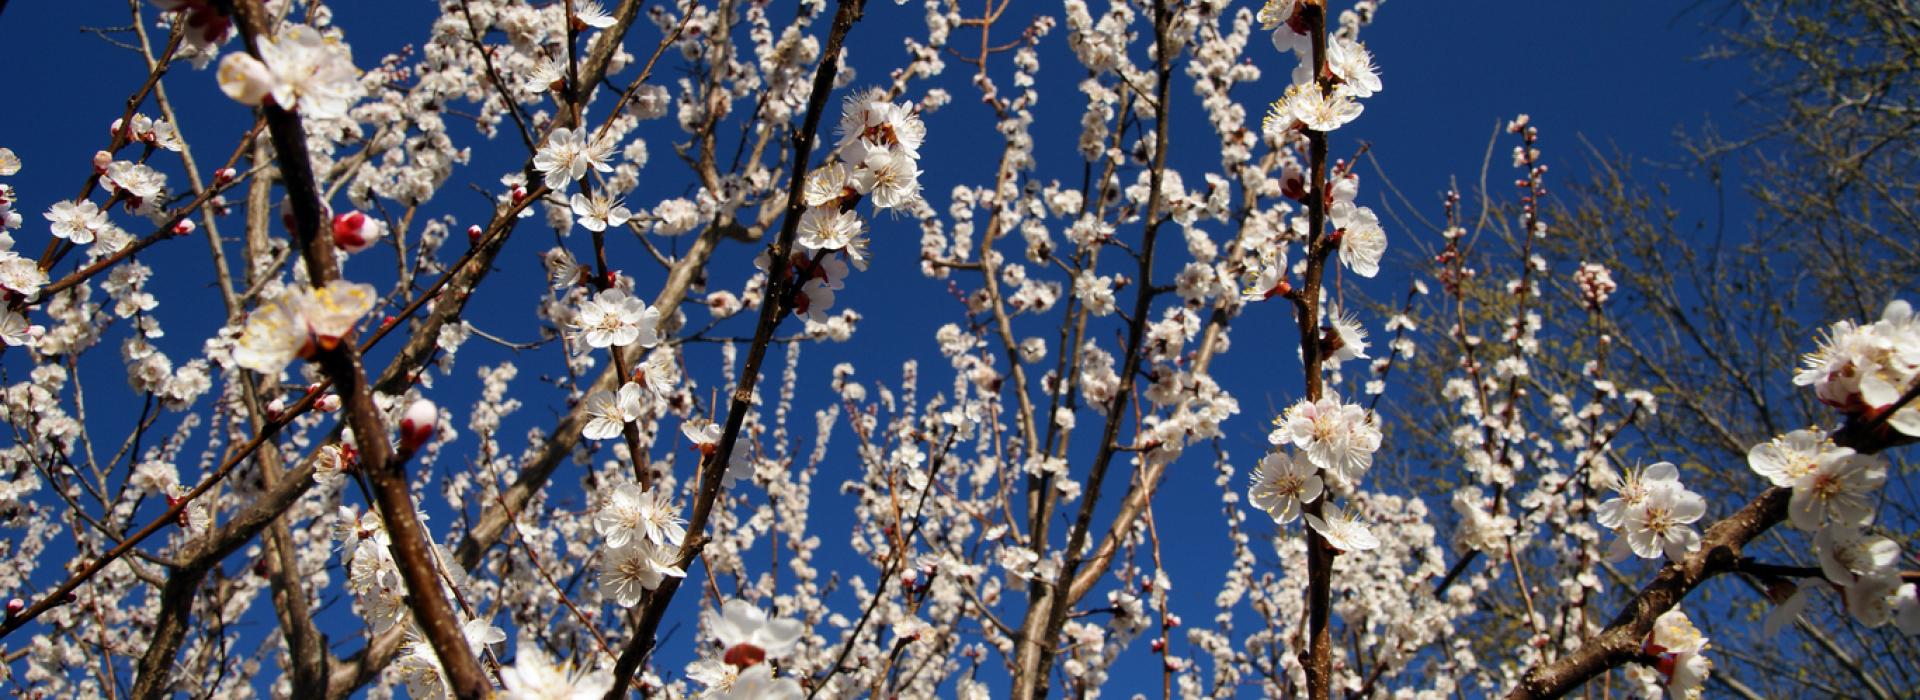 Flowering white tree blossoms burst out against a deep blue spring sky.